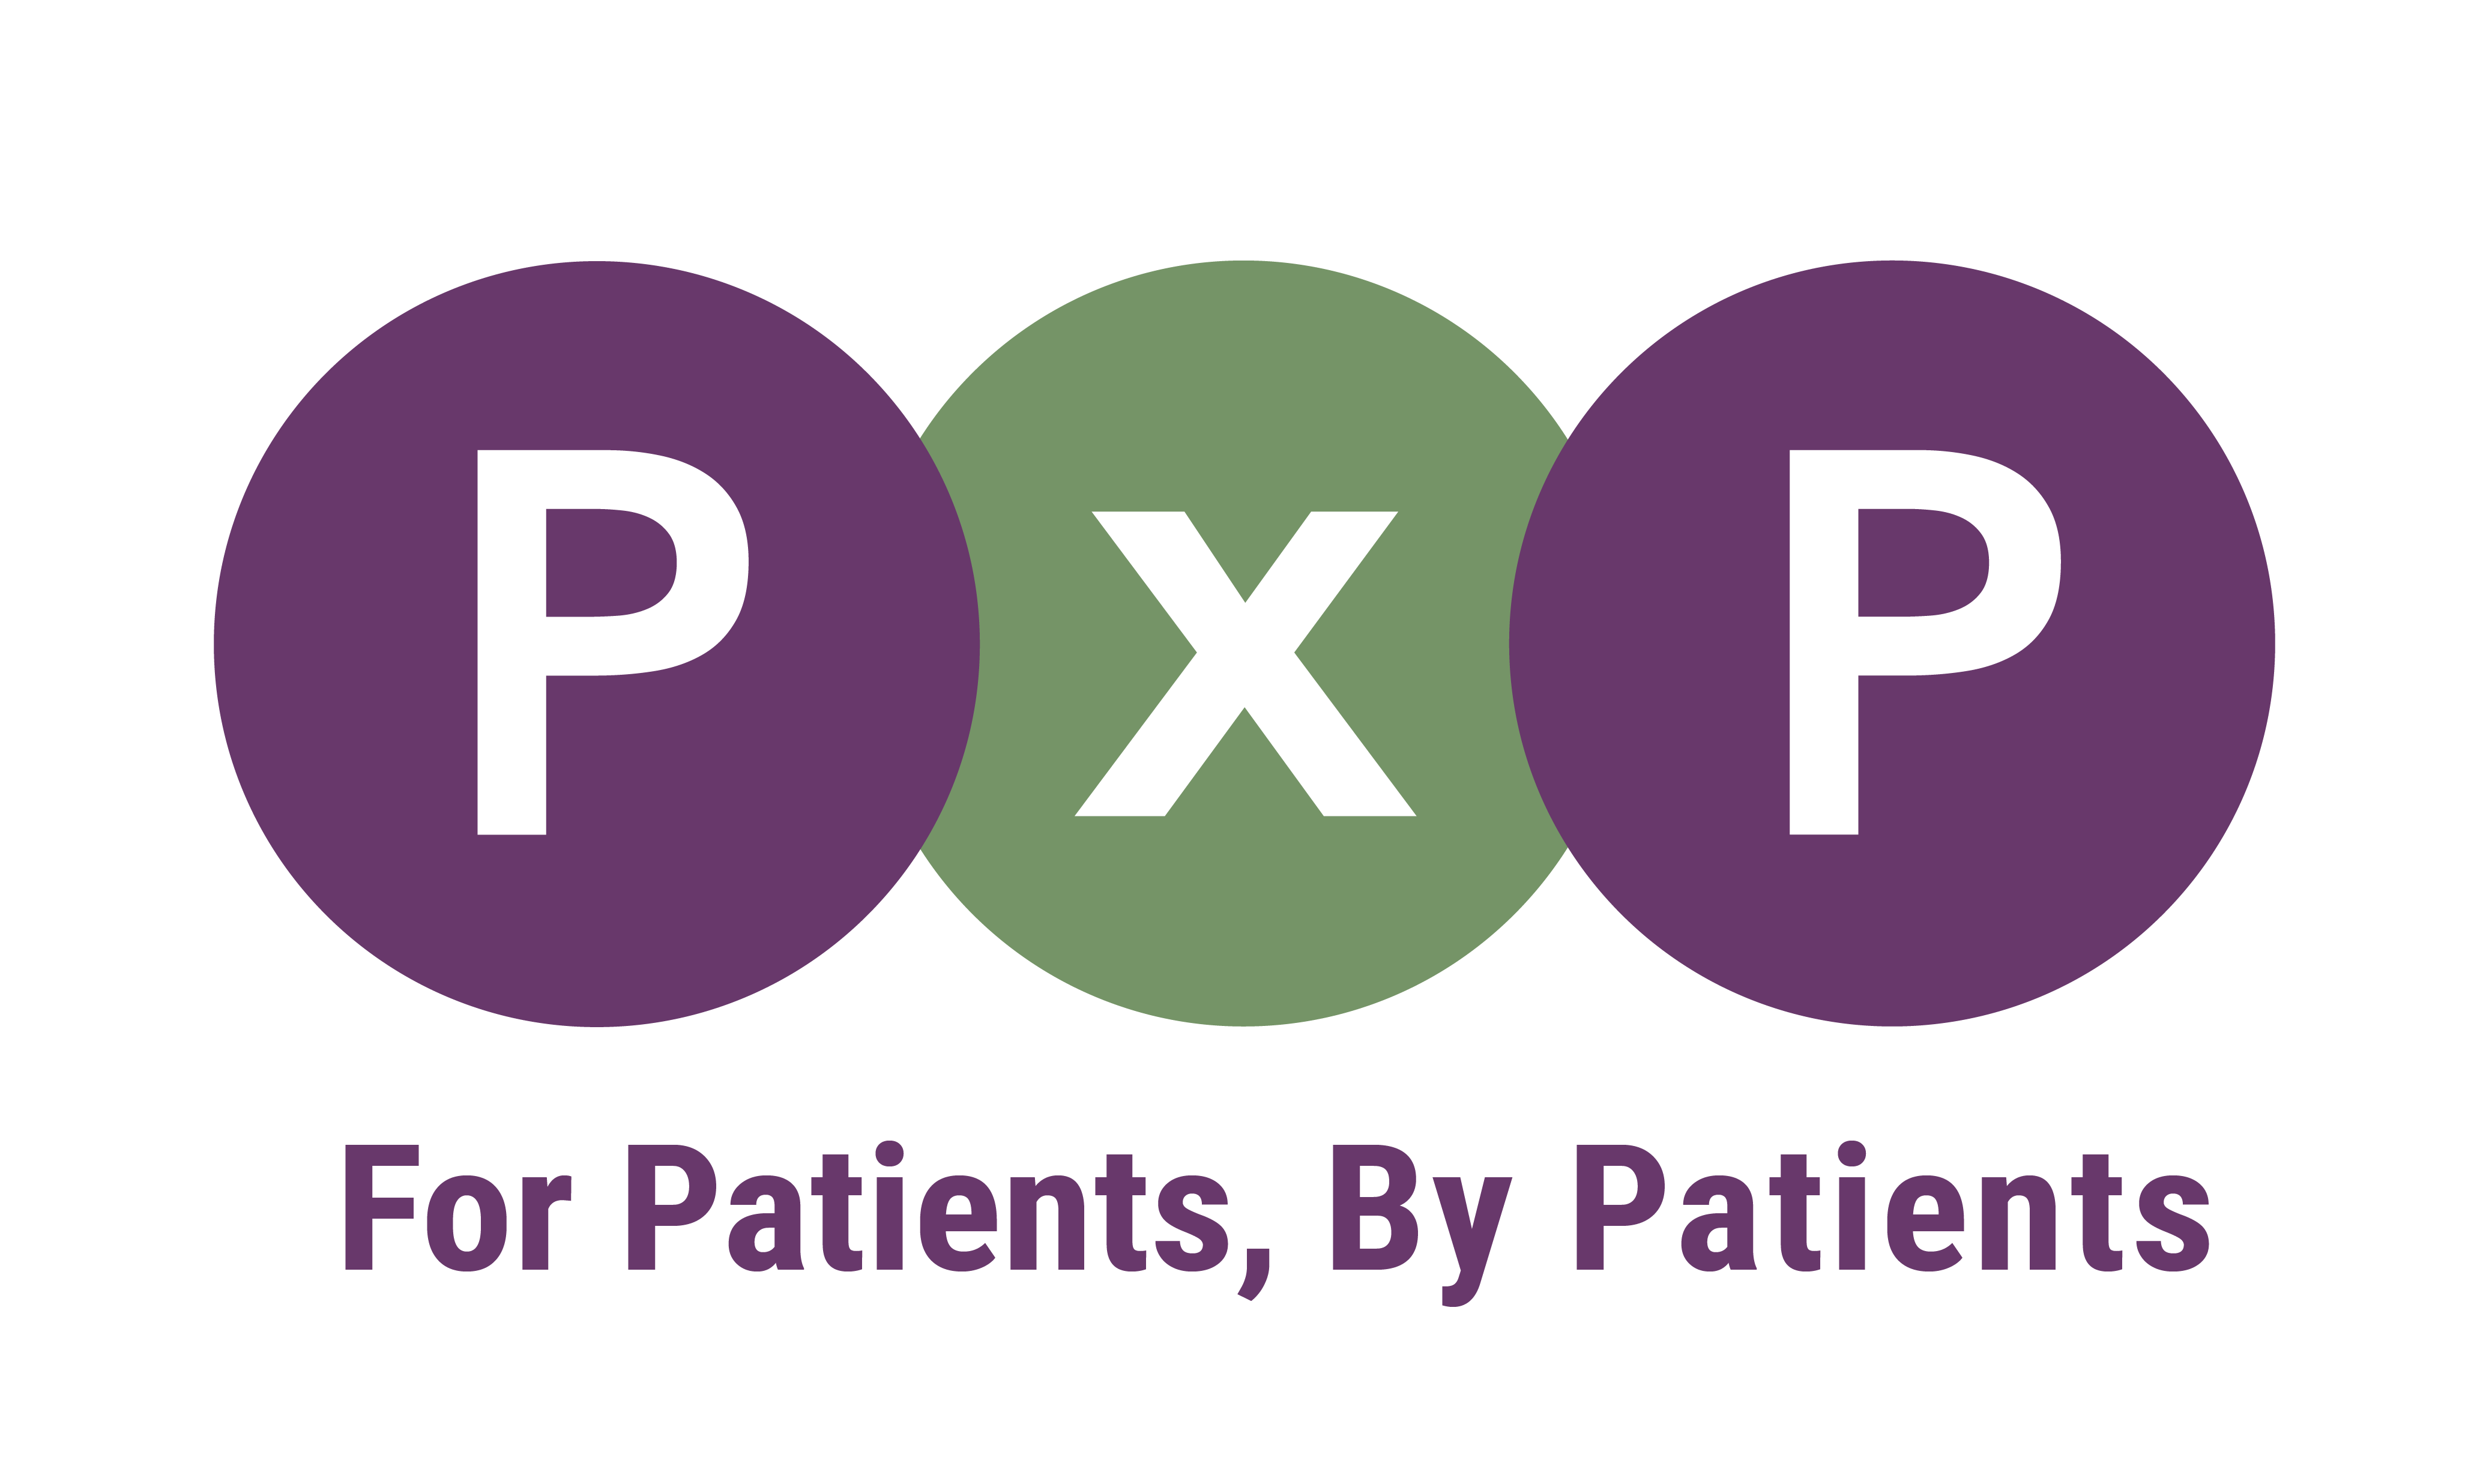 PxP Logo is three circles of the same size. These are purple, green and purple and each contain a letter from the brand name PxP. Underneath the PxP logo reads 'For Patients, By Patients'